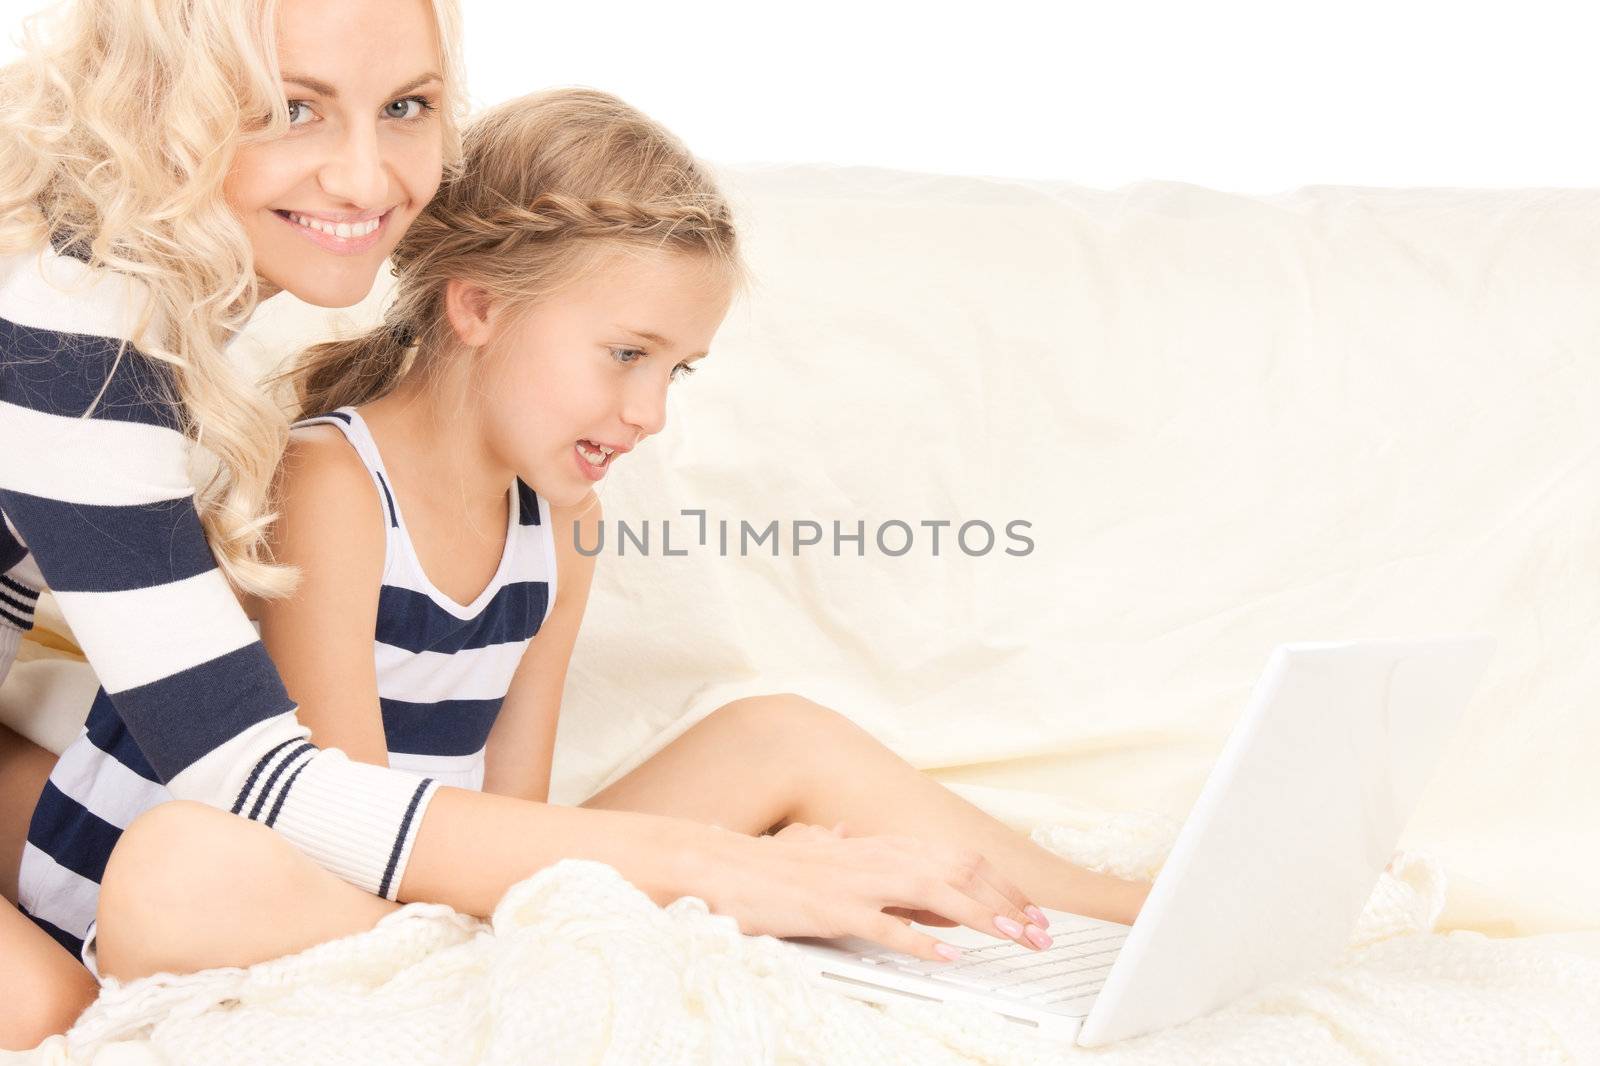 bright picture of happy mother and child with laptop computer (focus on girl)